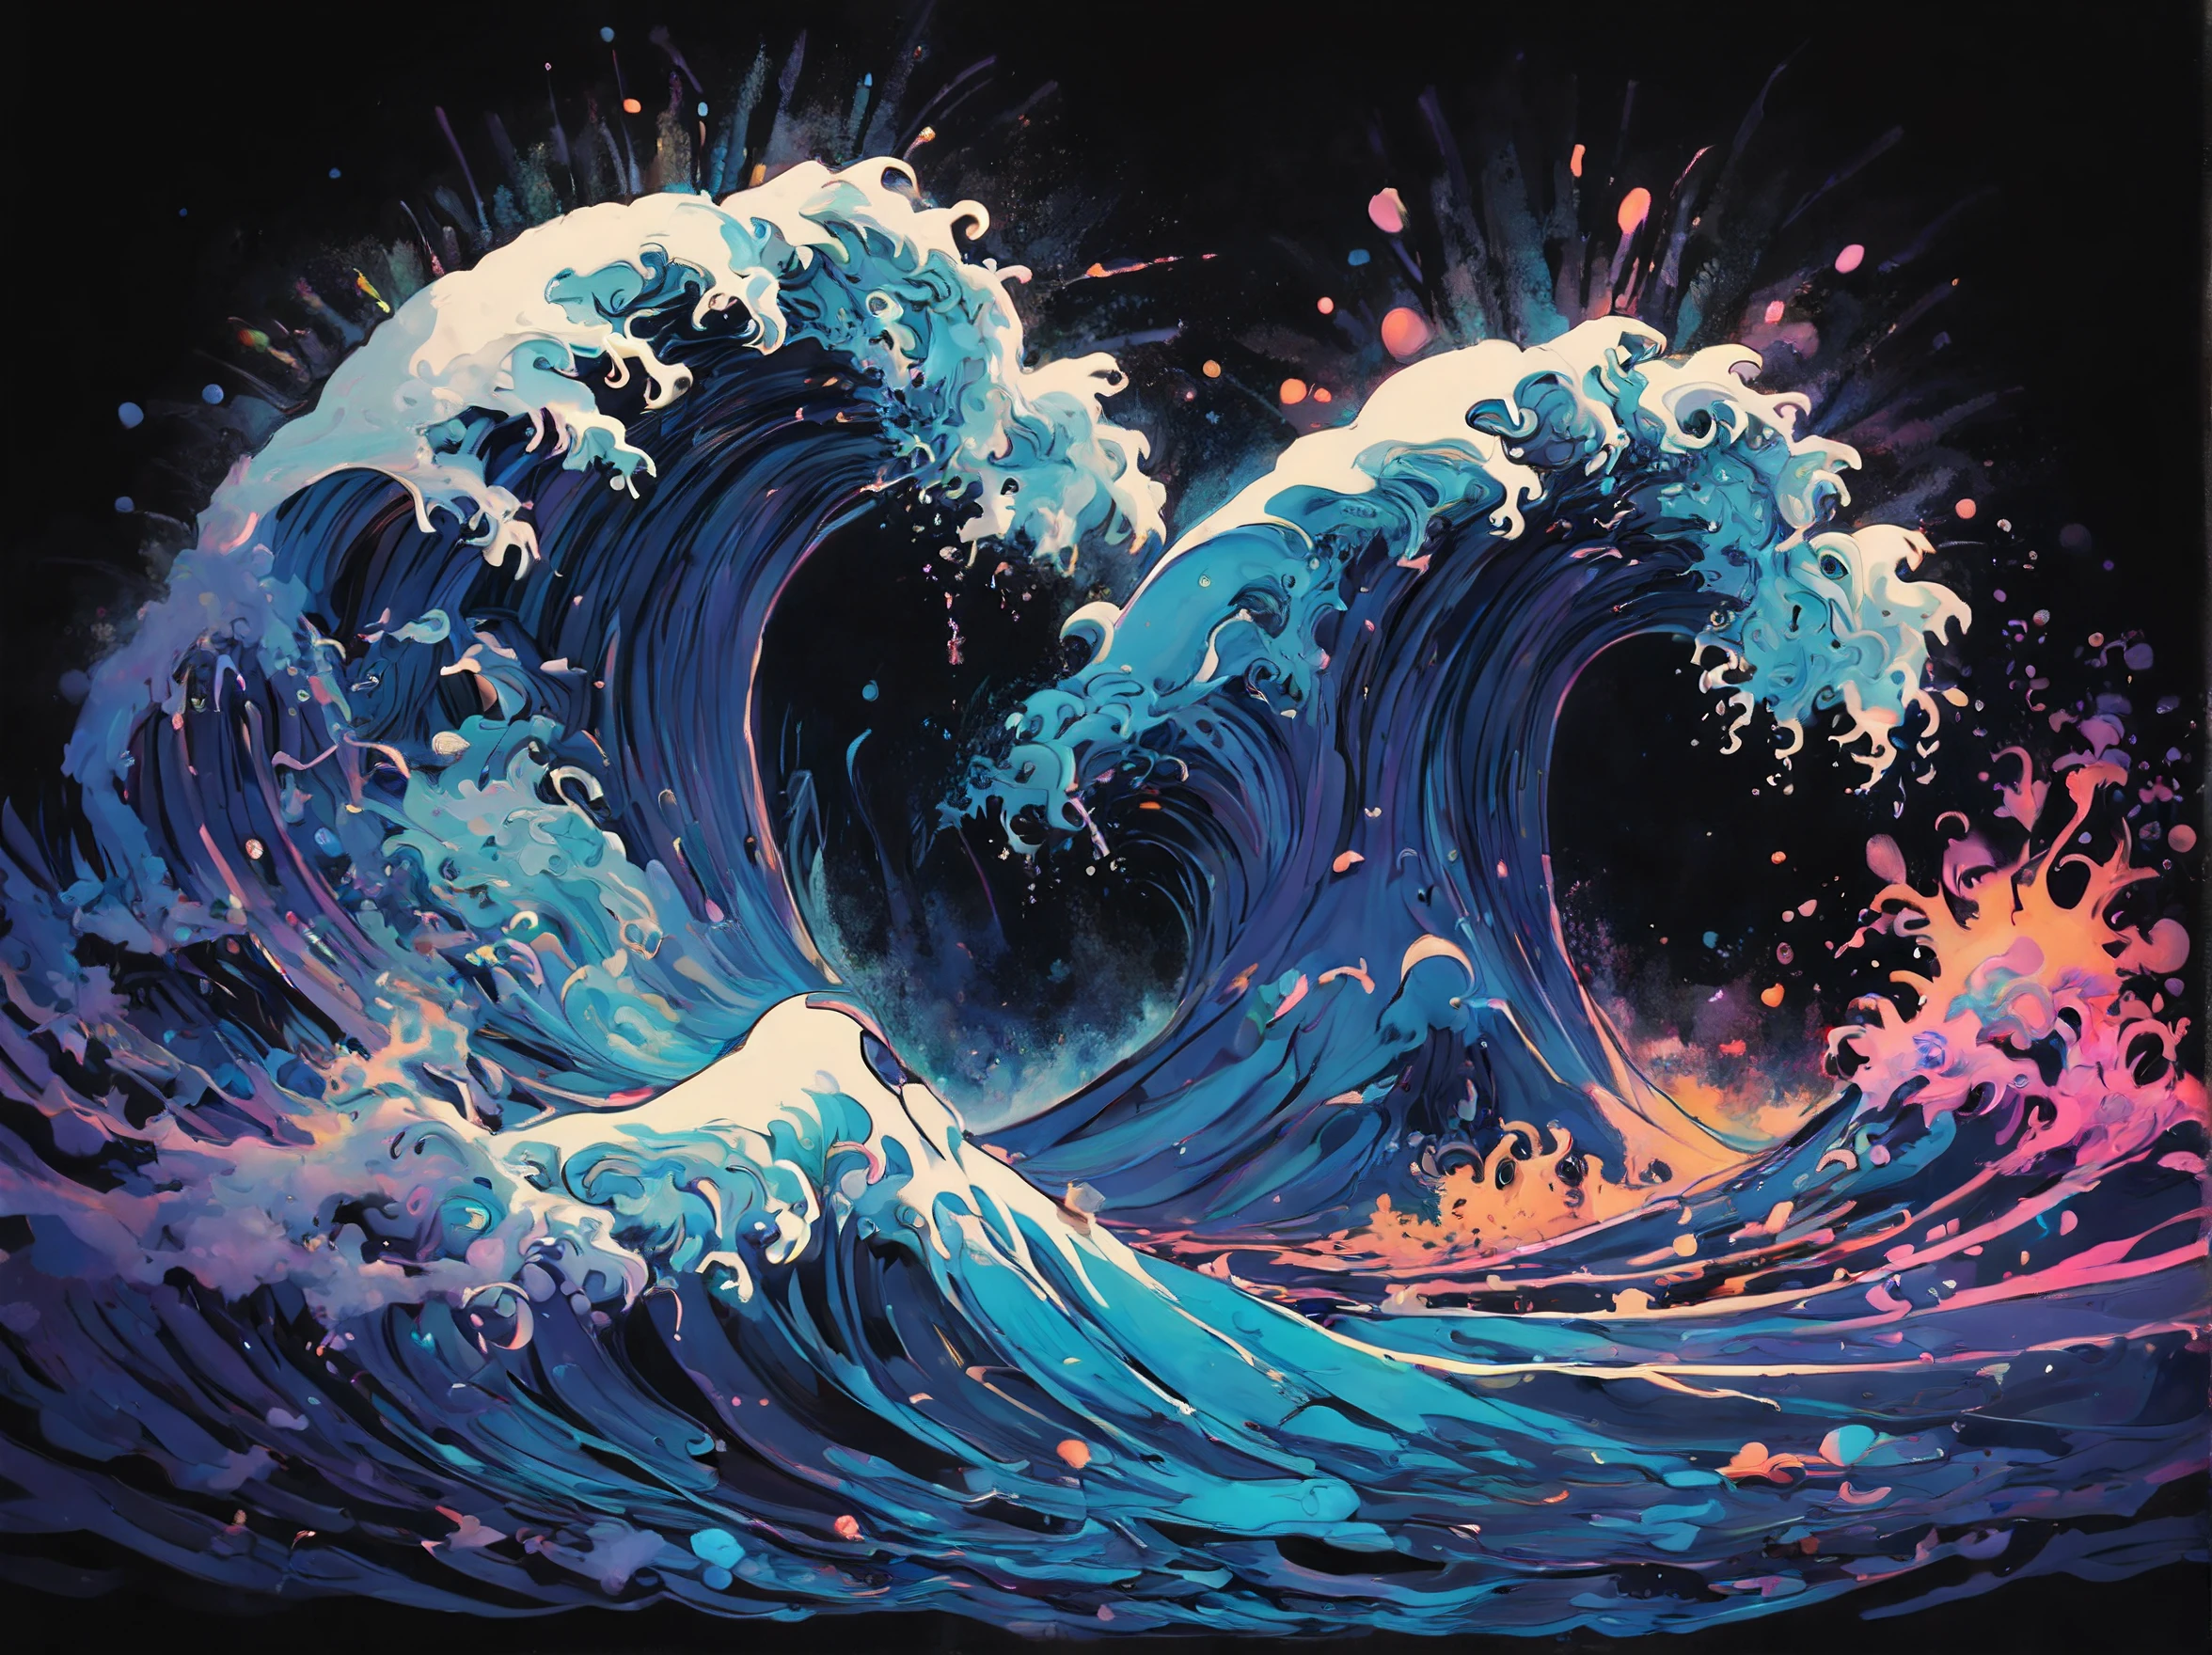 Beautiful Black Light Art inspired by Takashi Murakami  depicted of wave of ocean that express difference of poor and rich, splash brush color, exposure, light, (Black light art), black background, blacklight. light painting